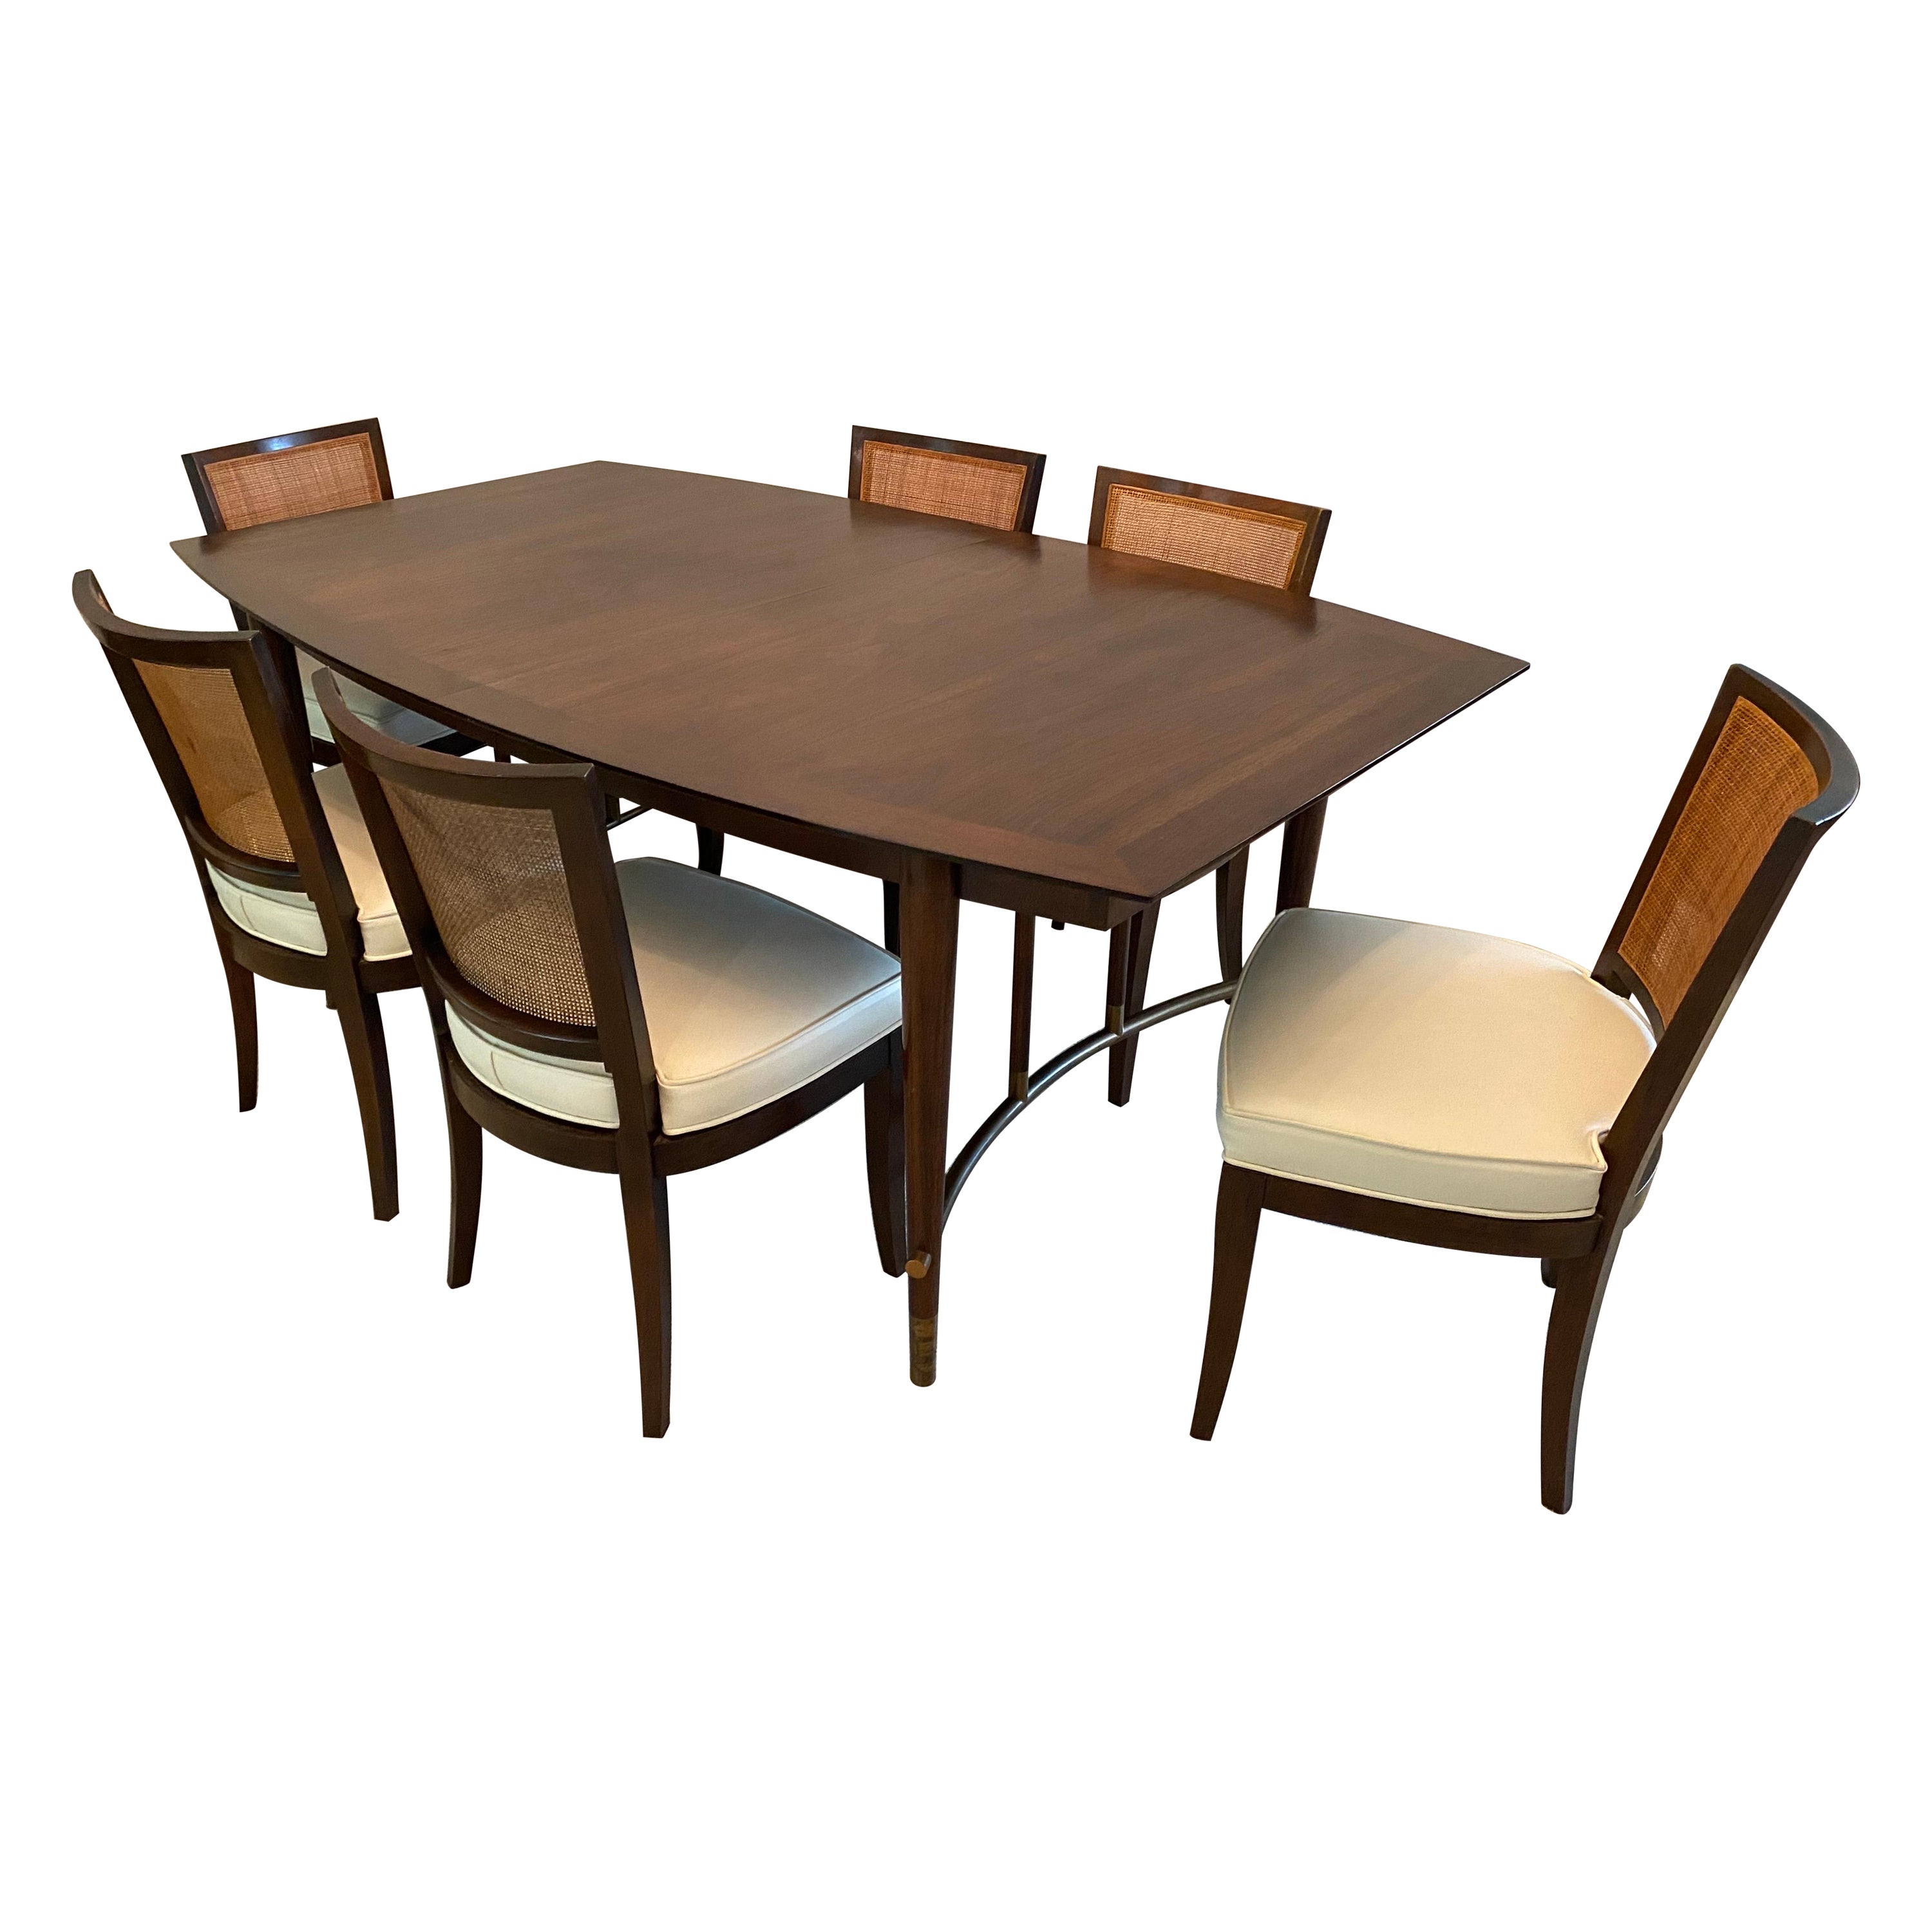 Bert England for Johnson Furniture Dining Room Table and 6 chairs